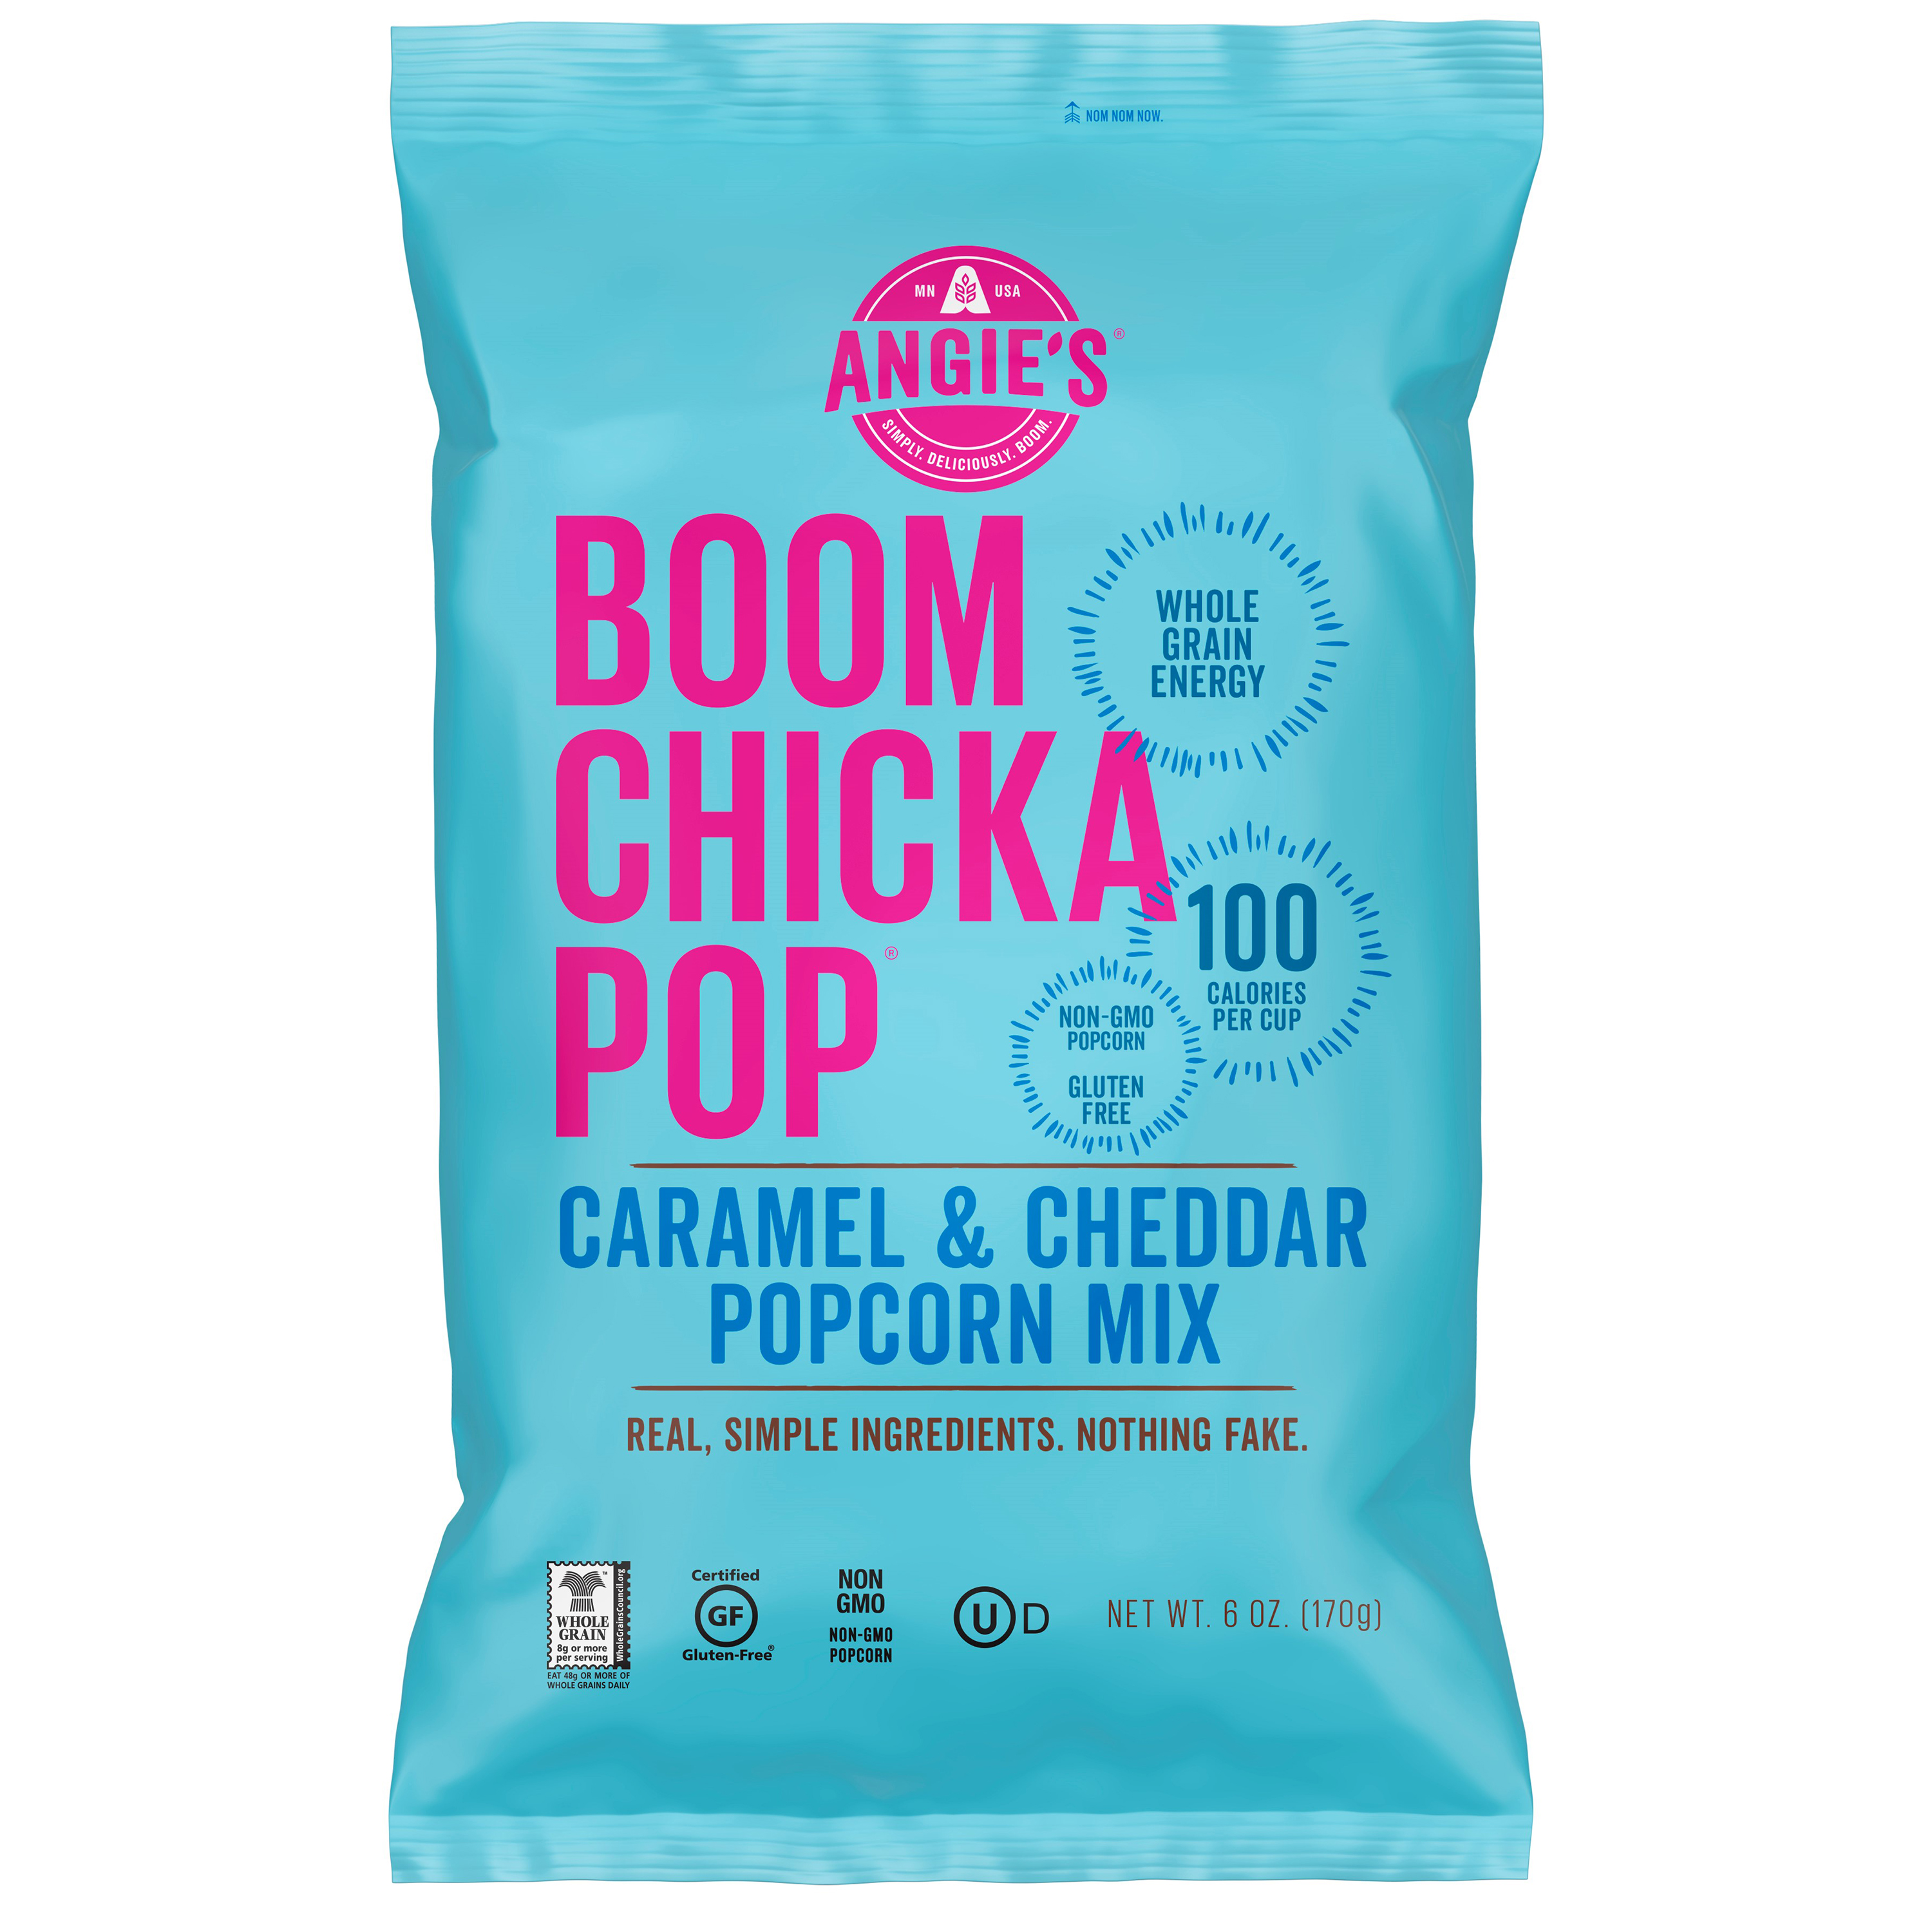 Angie?s BOOMCHICKAPOP Caramel & Cheddar Popcorn Mix, 6 Ounce Bag, Box of 12 - image 1 of 5